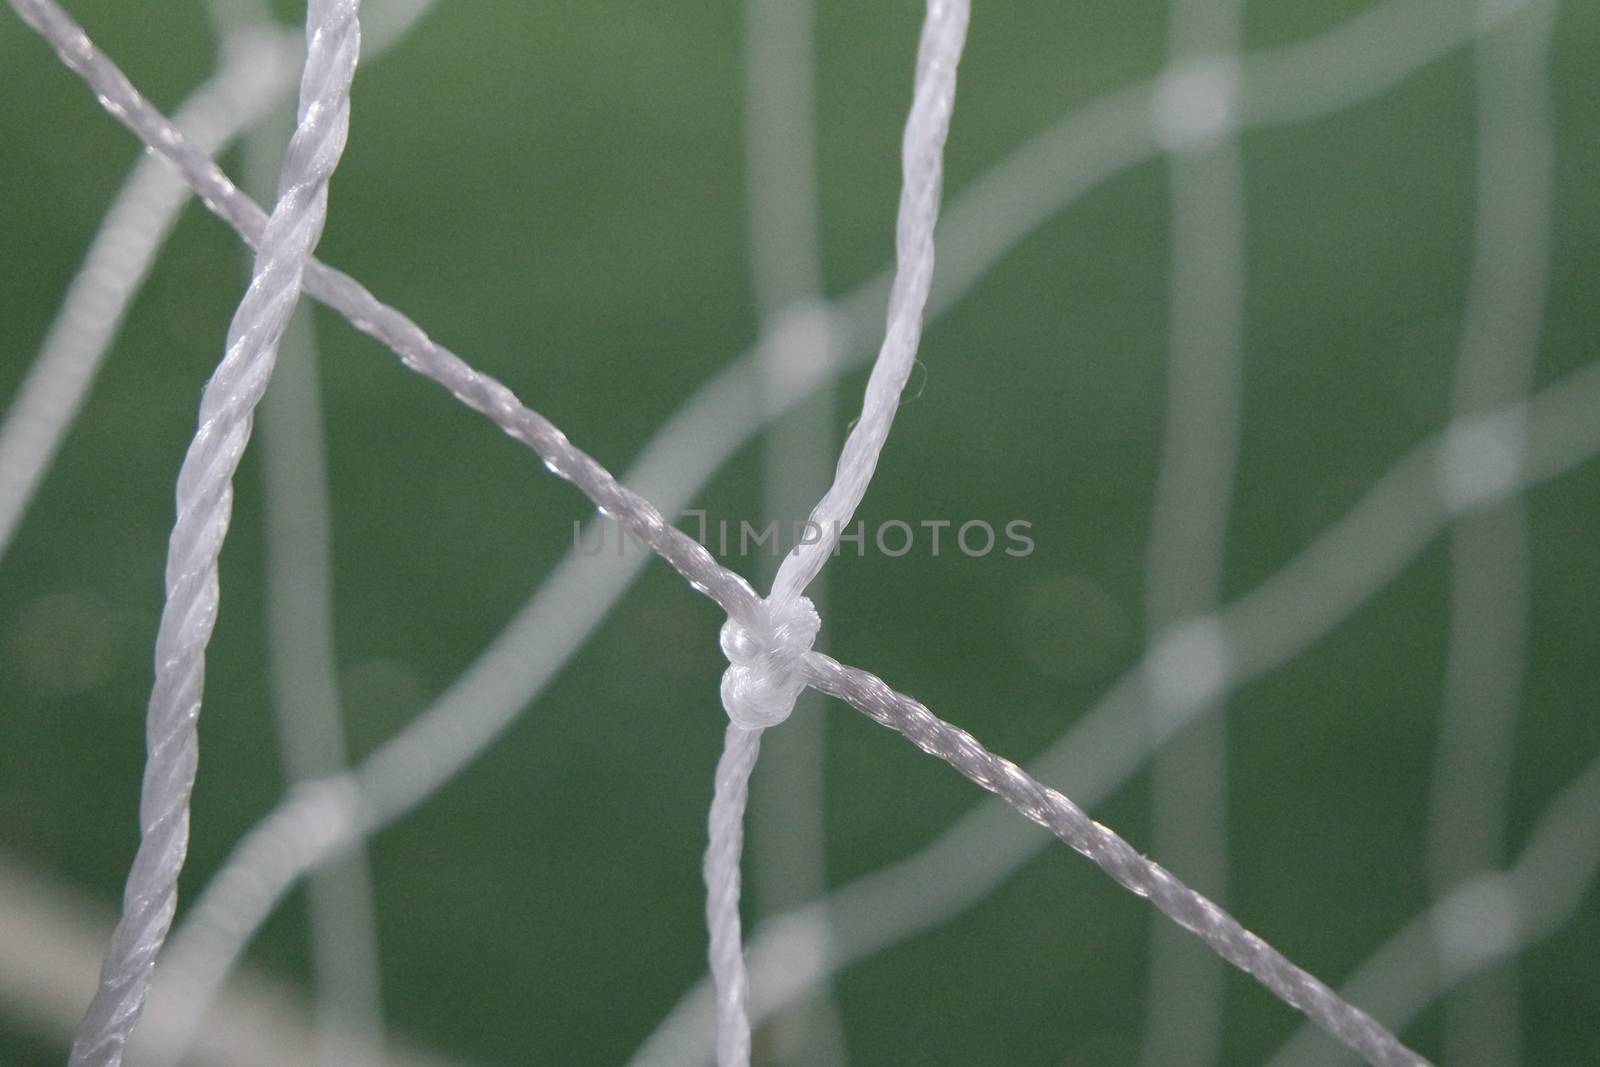 Closeup view of goal net in a soccer playground by Photochowk